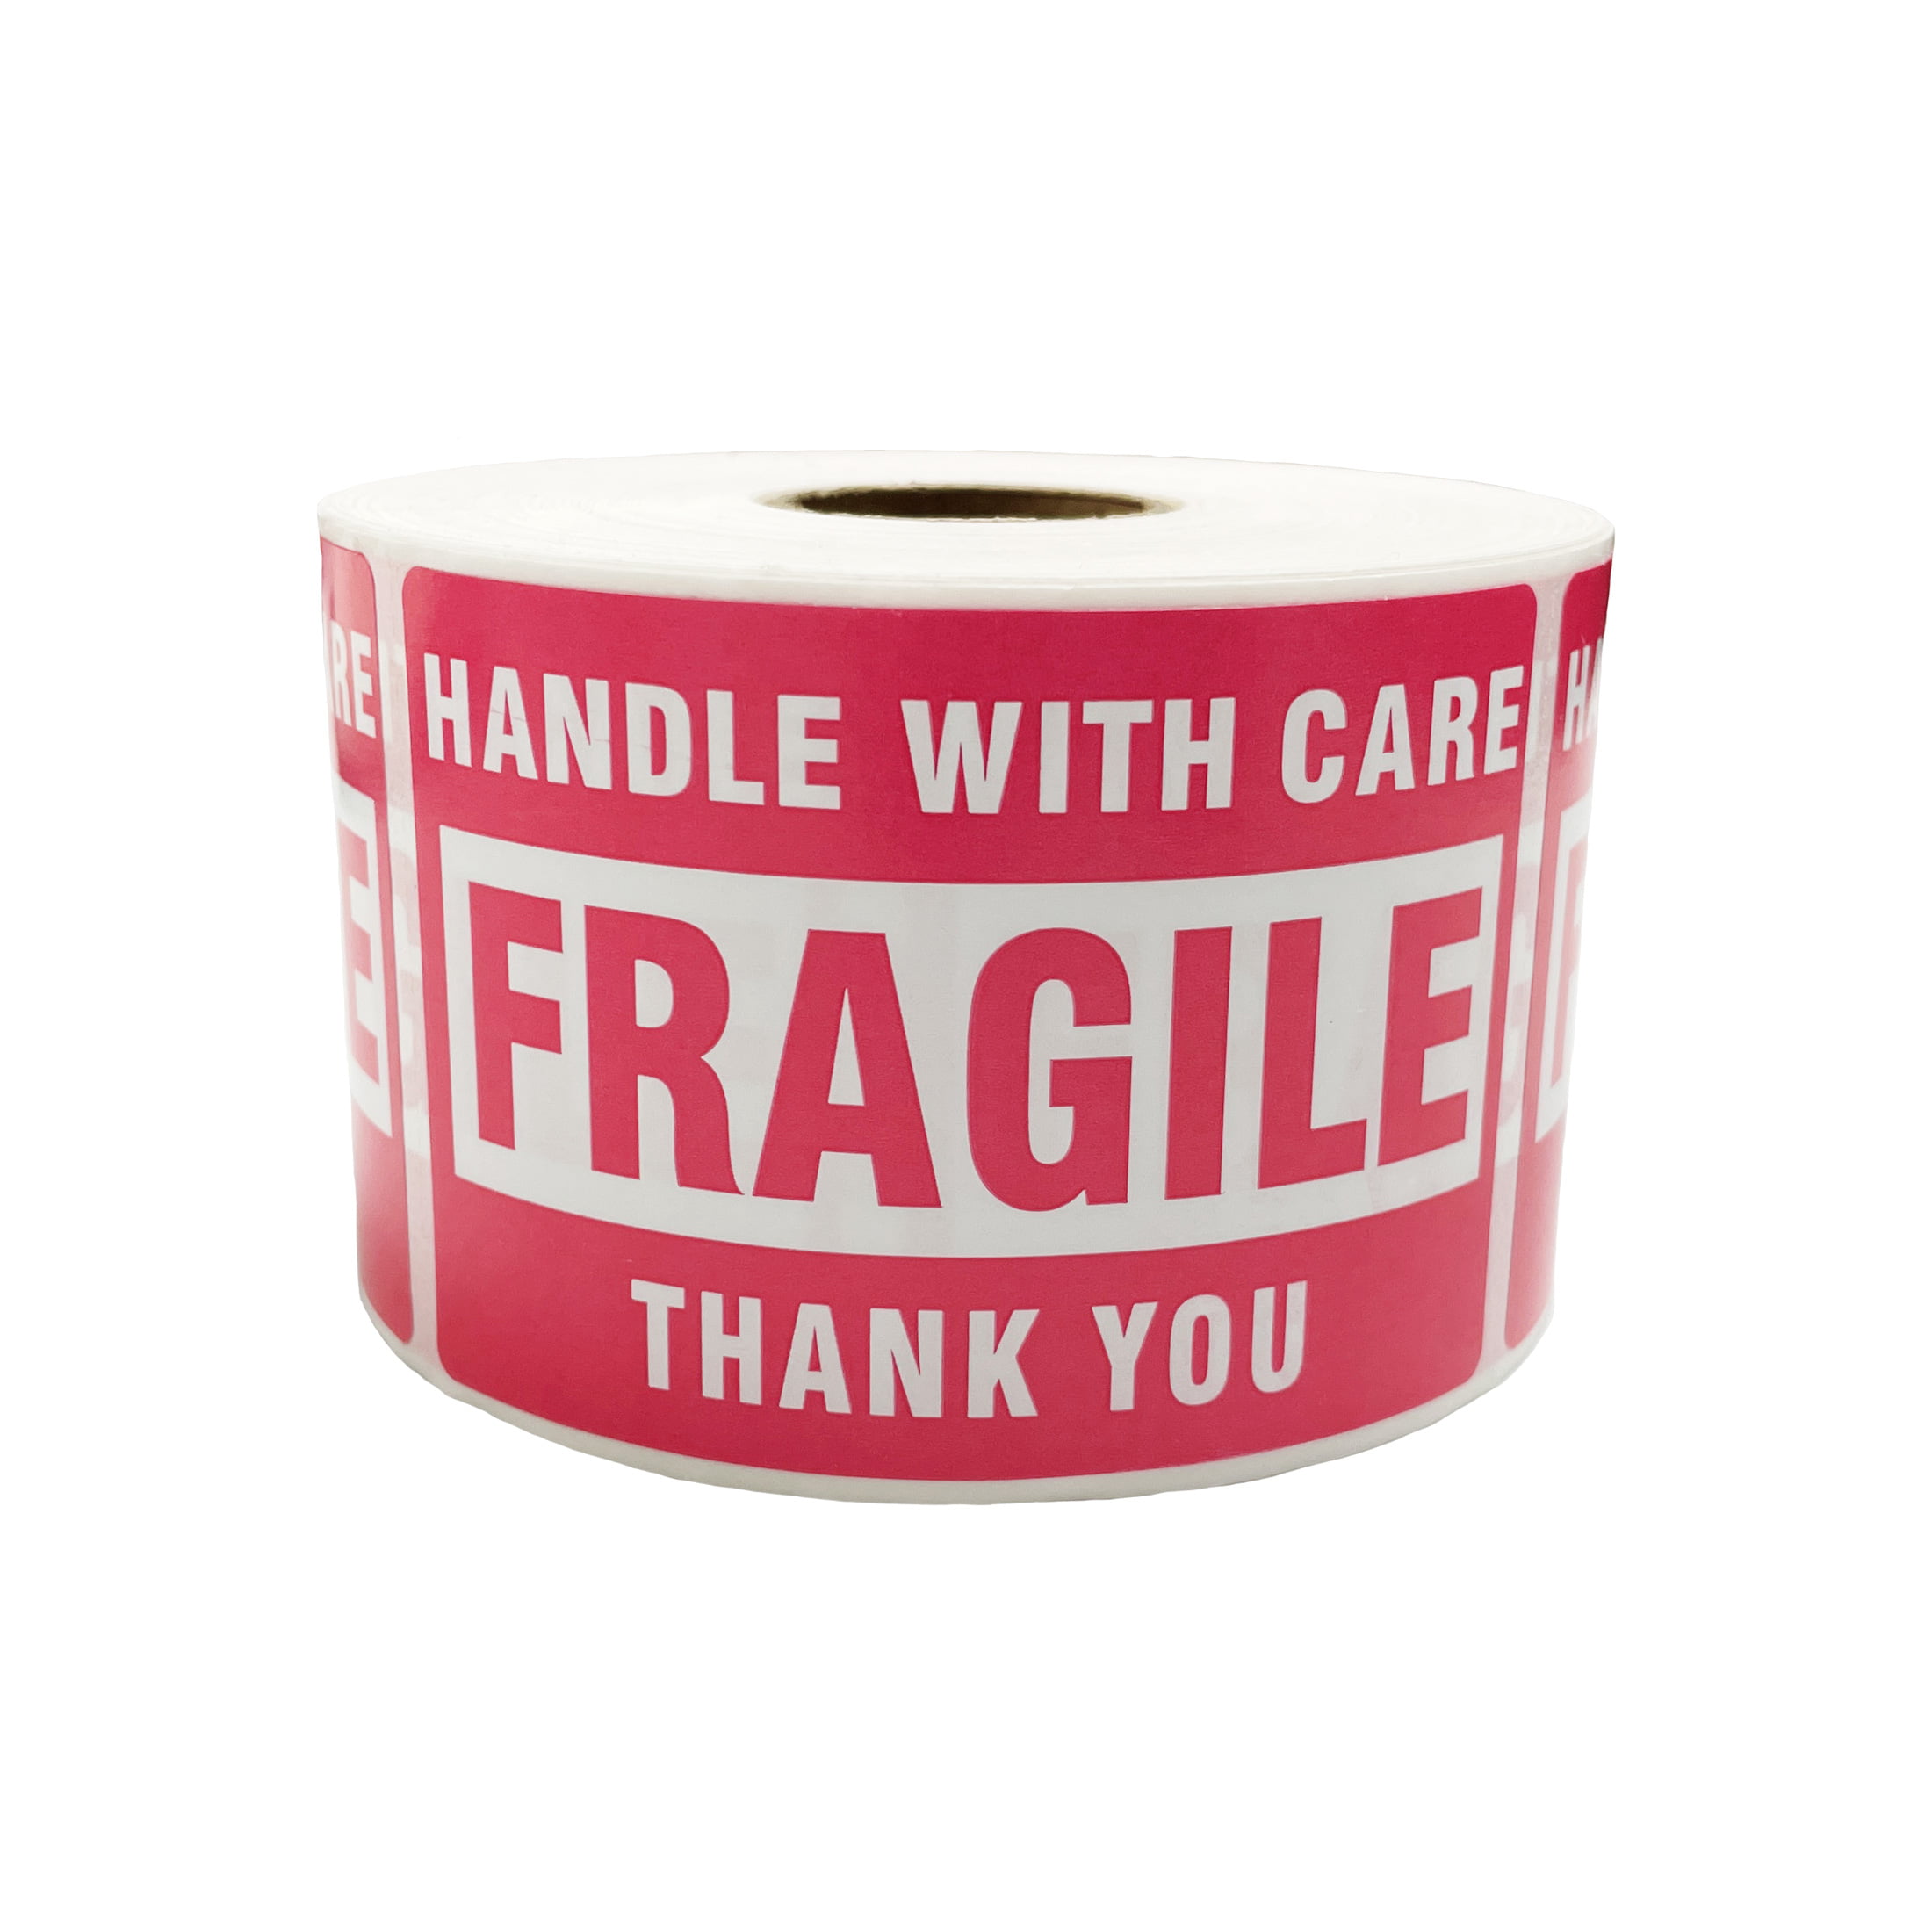 120pcs Fragile Handle With Care 7x5cm Self-adhesive Shipping Label Stickers Warning Label Sticker